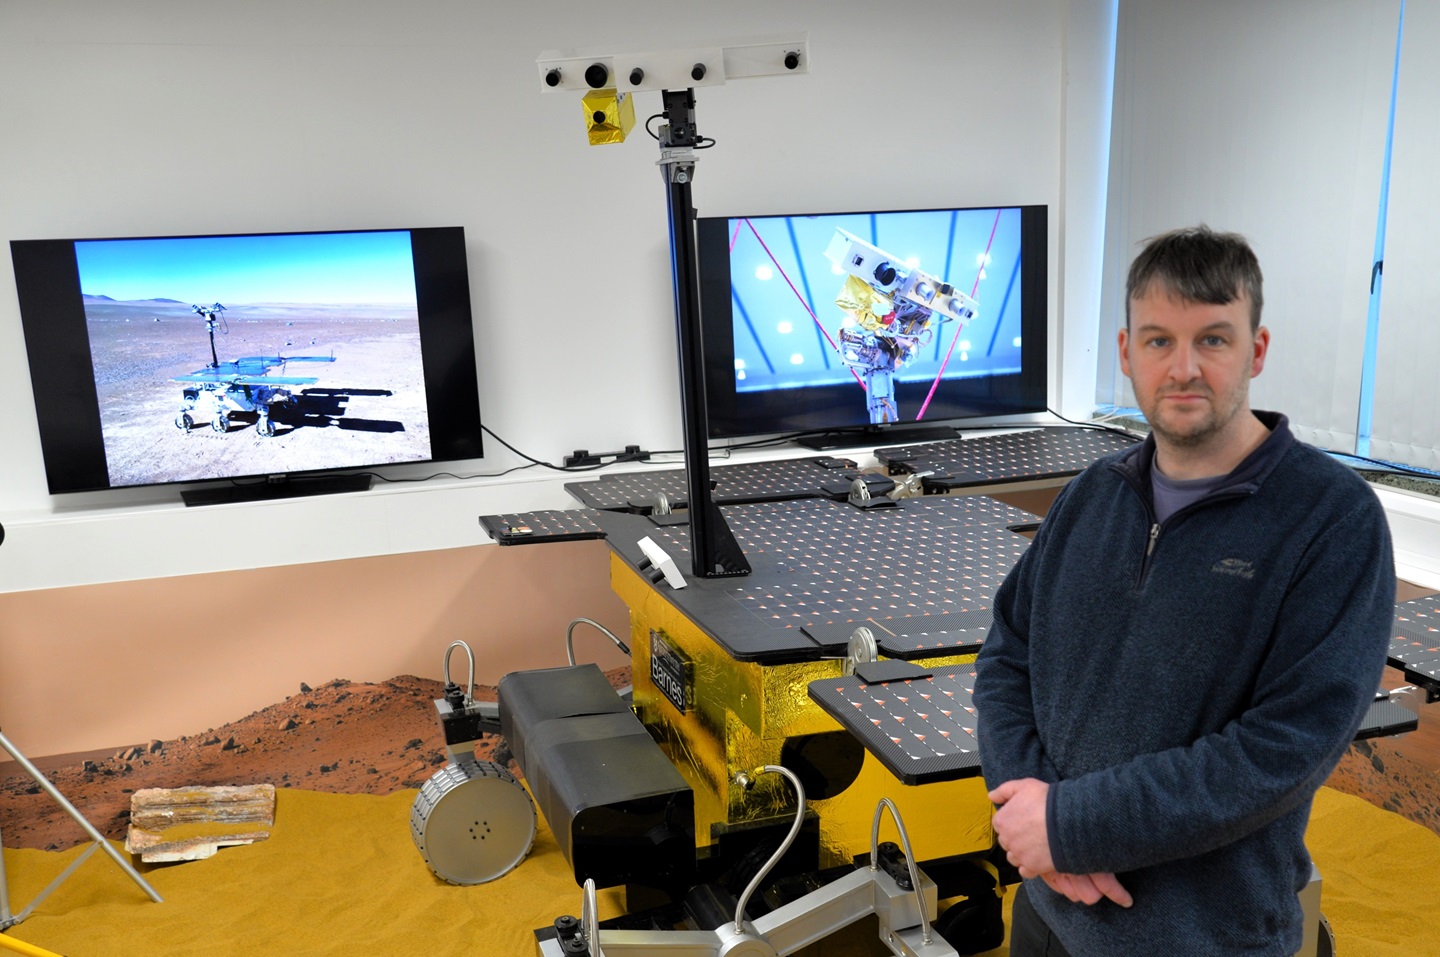 Dr Matt Gunn, Principal Investigator on Enfys, the new infrared spectrometer being developed for the ExoMars mission, with a full size model of the Rosalind Frankin rover at Aberystwyth University. Credit: Aberystwyth University